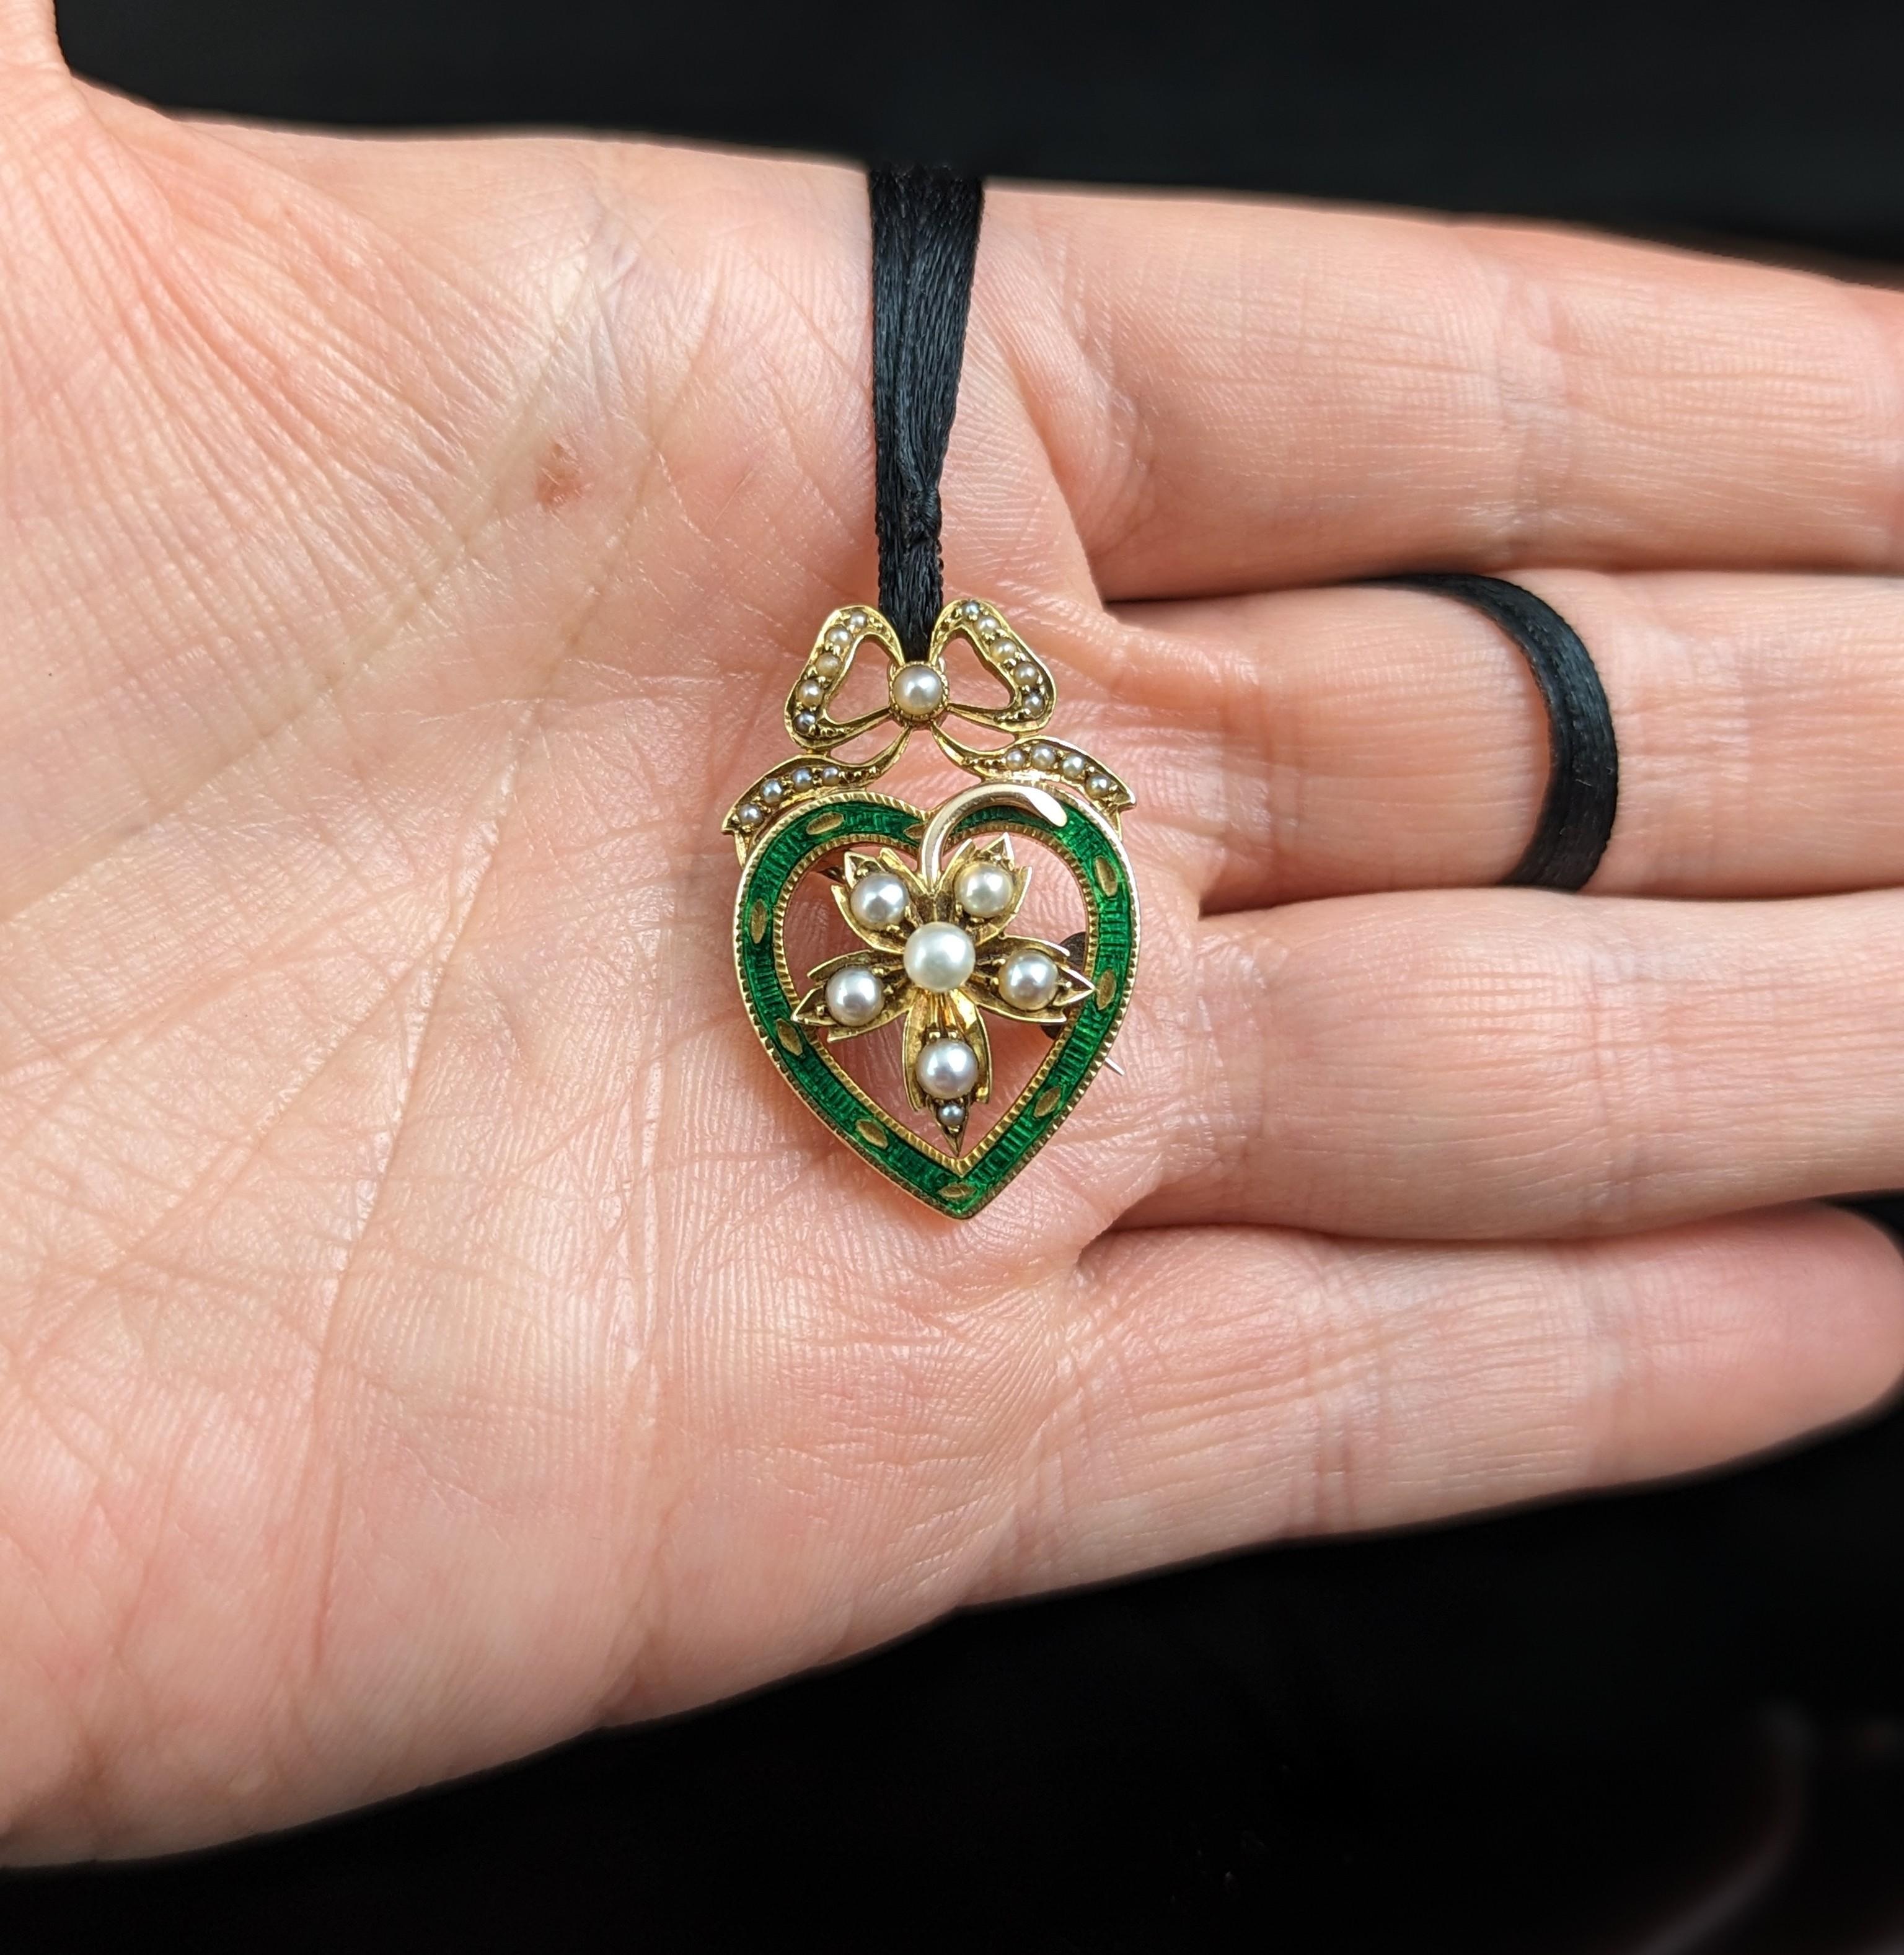 Antique Green Enamel and Pearl Heart pendant brooch, 9k yellow gold  For Sale 5